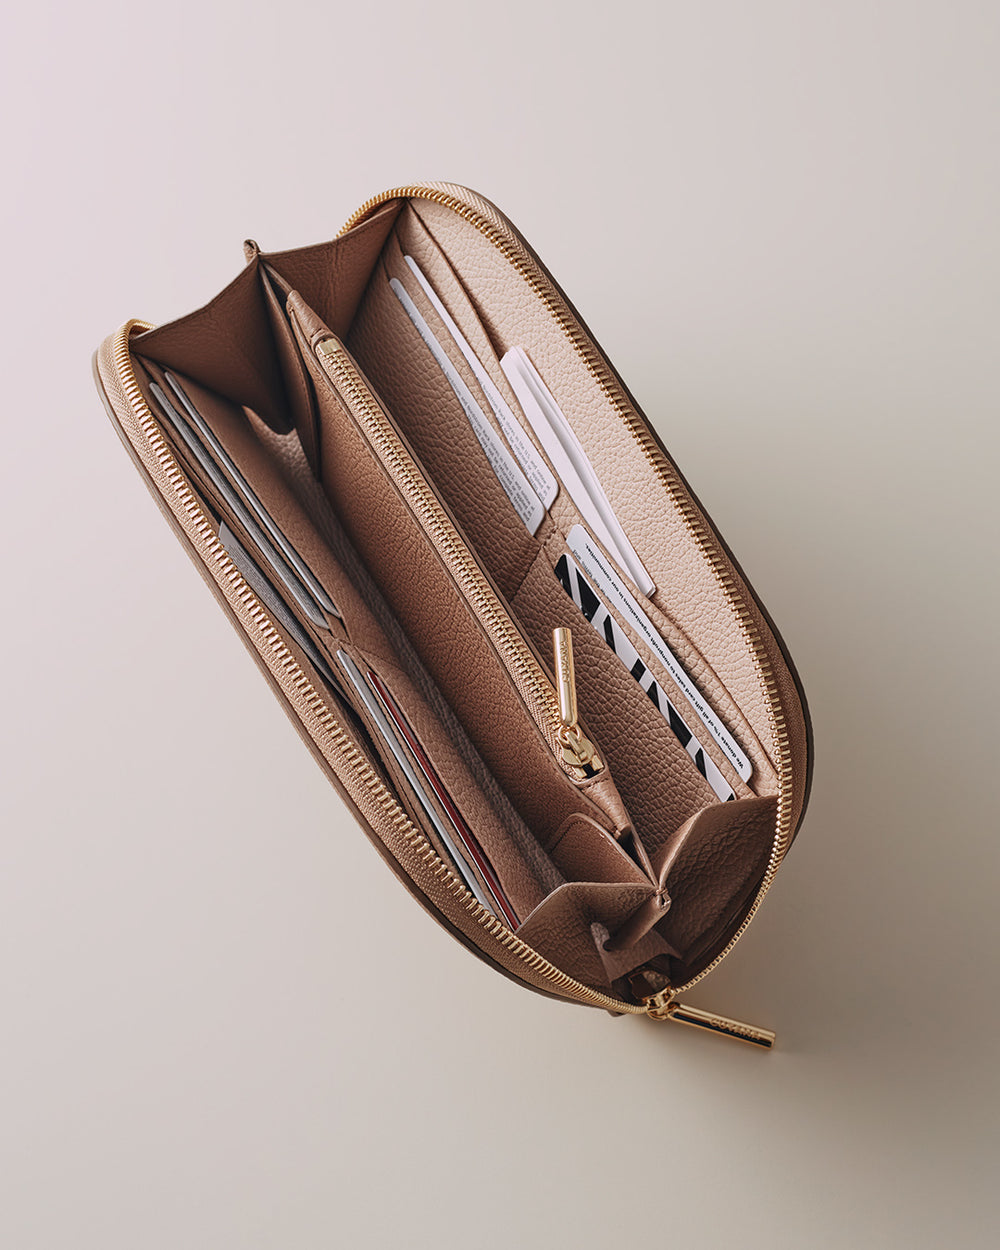 Open pencil case with various writing instruments inside.